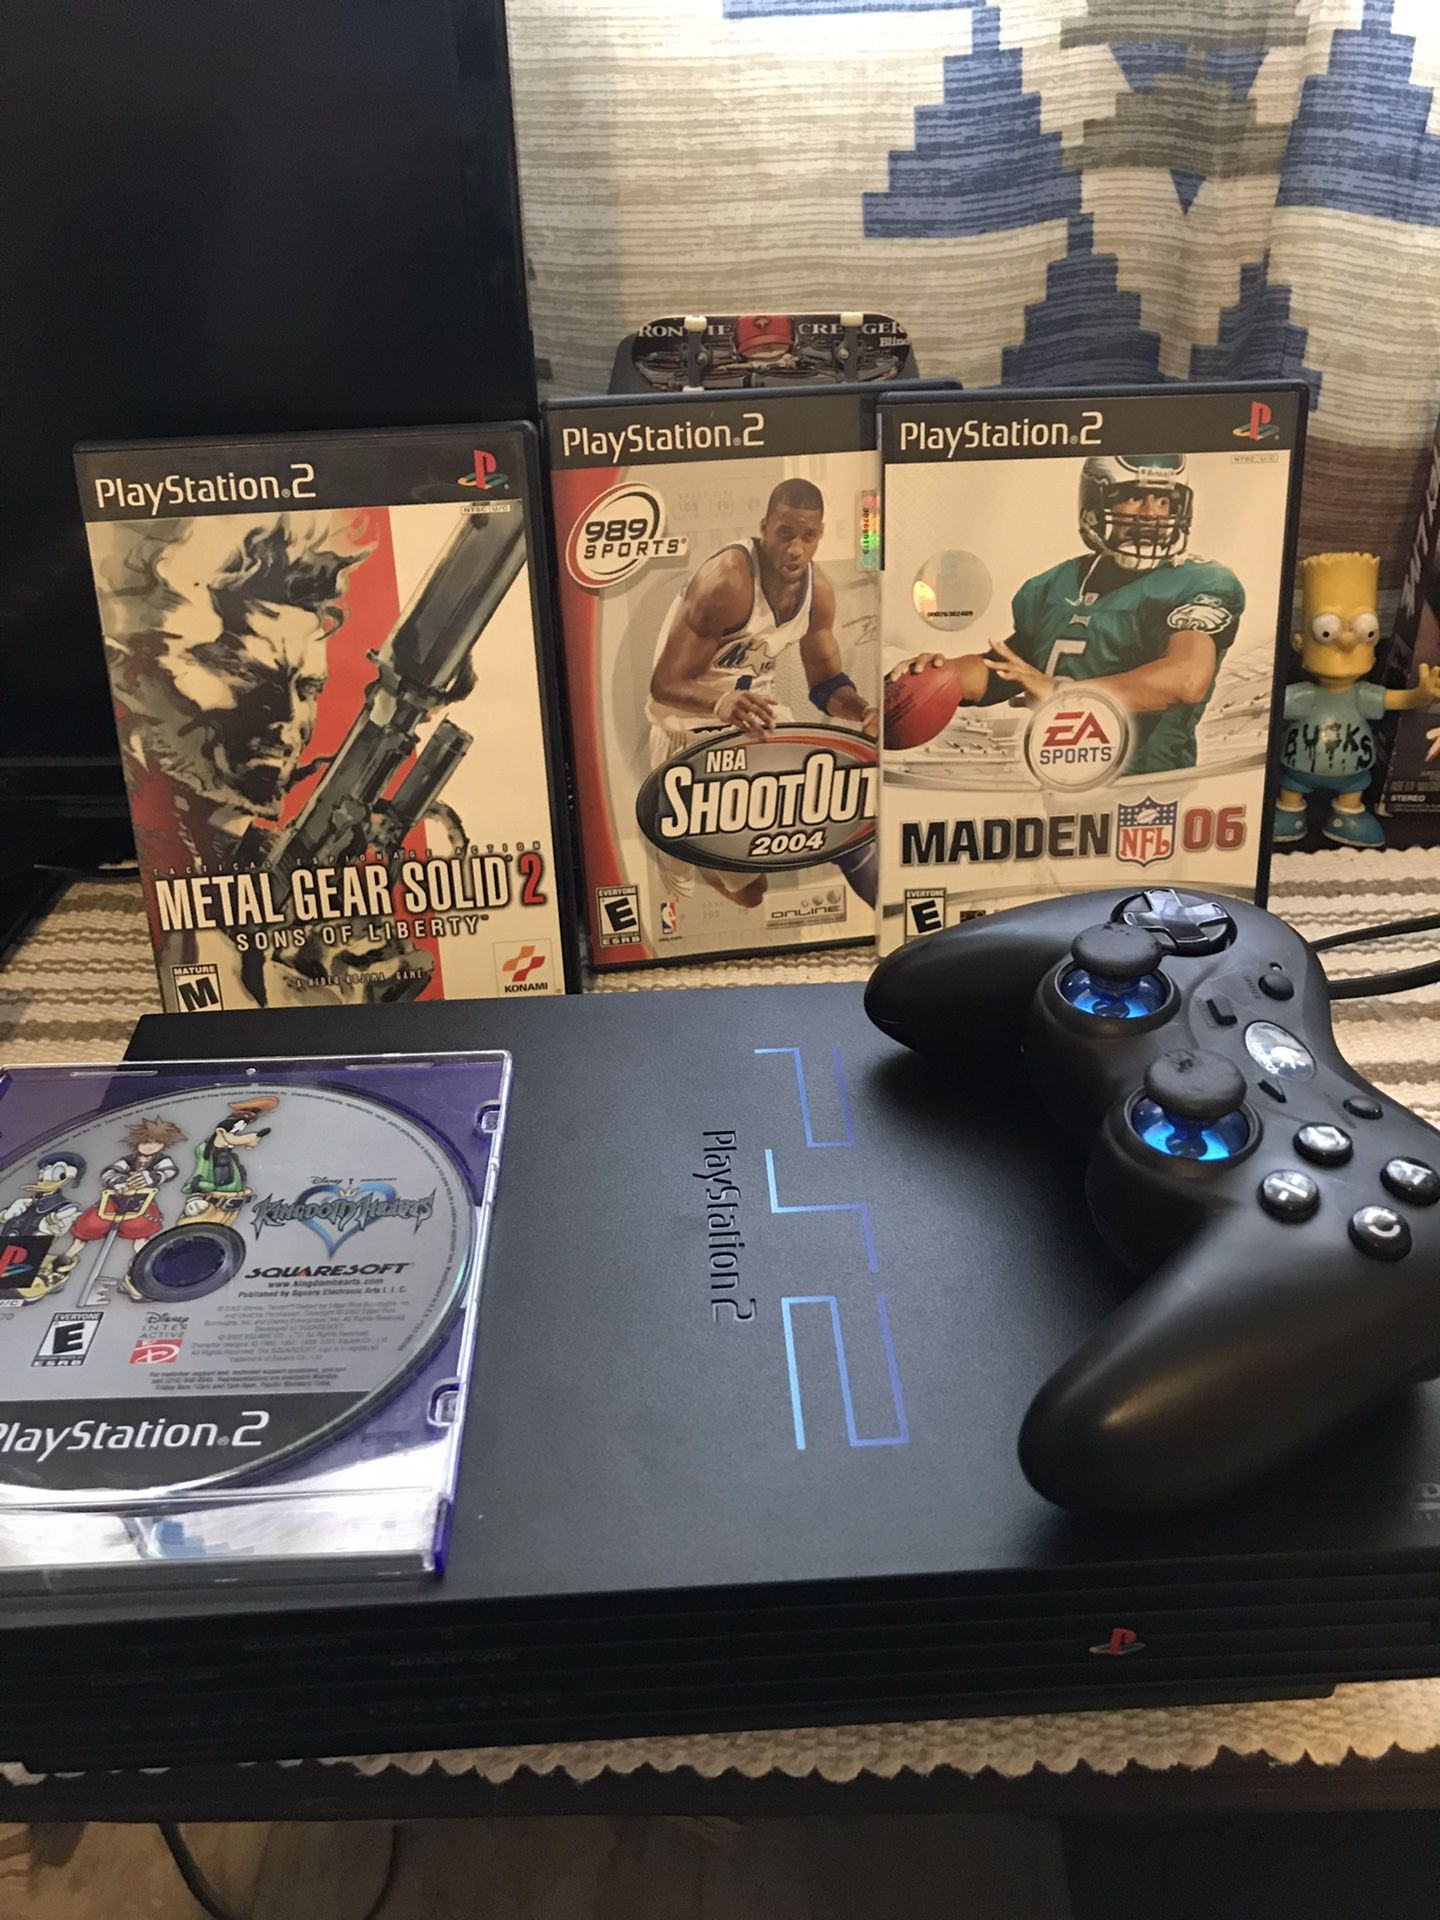 Ps2 With Games